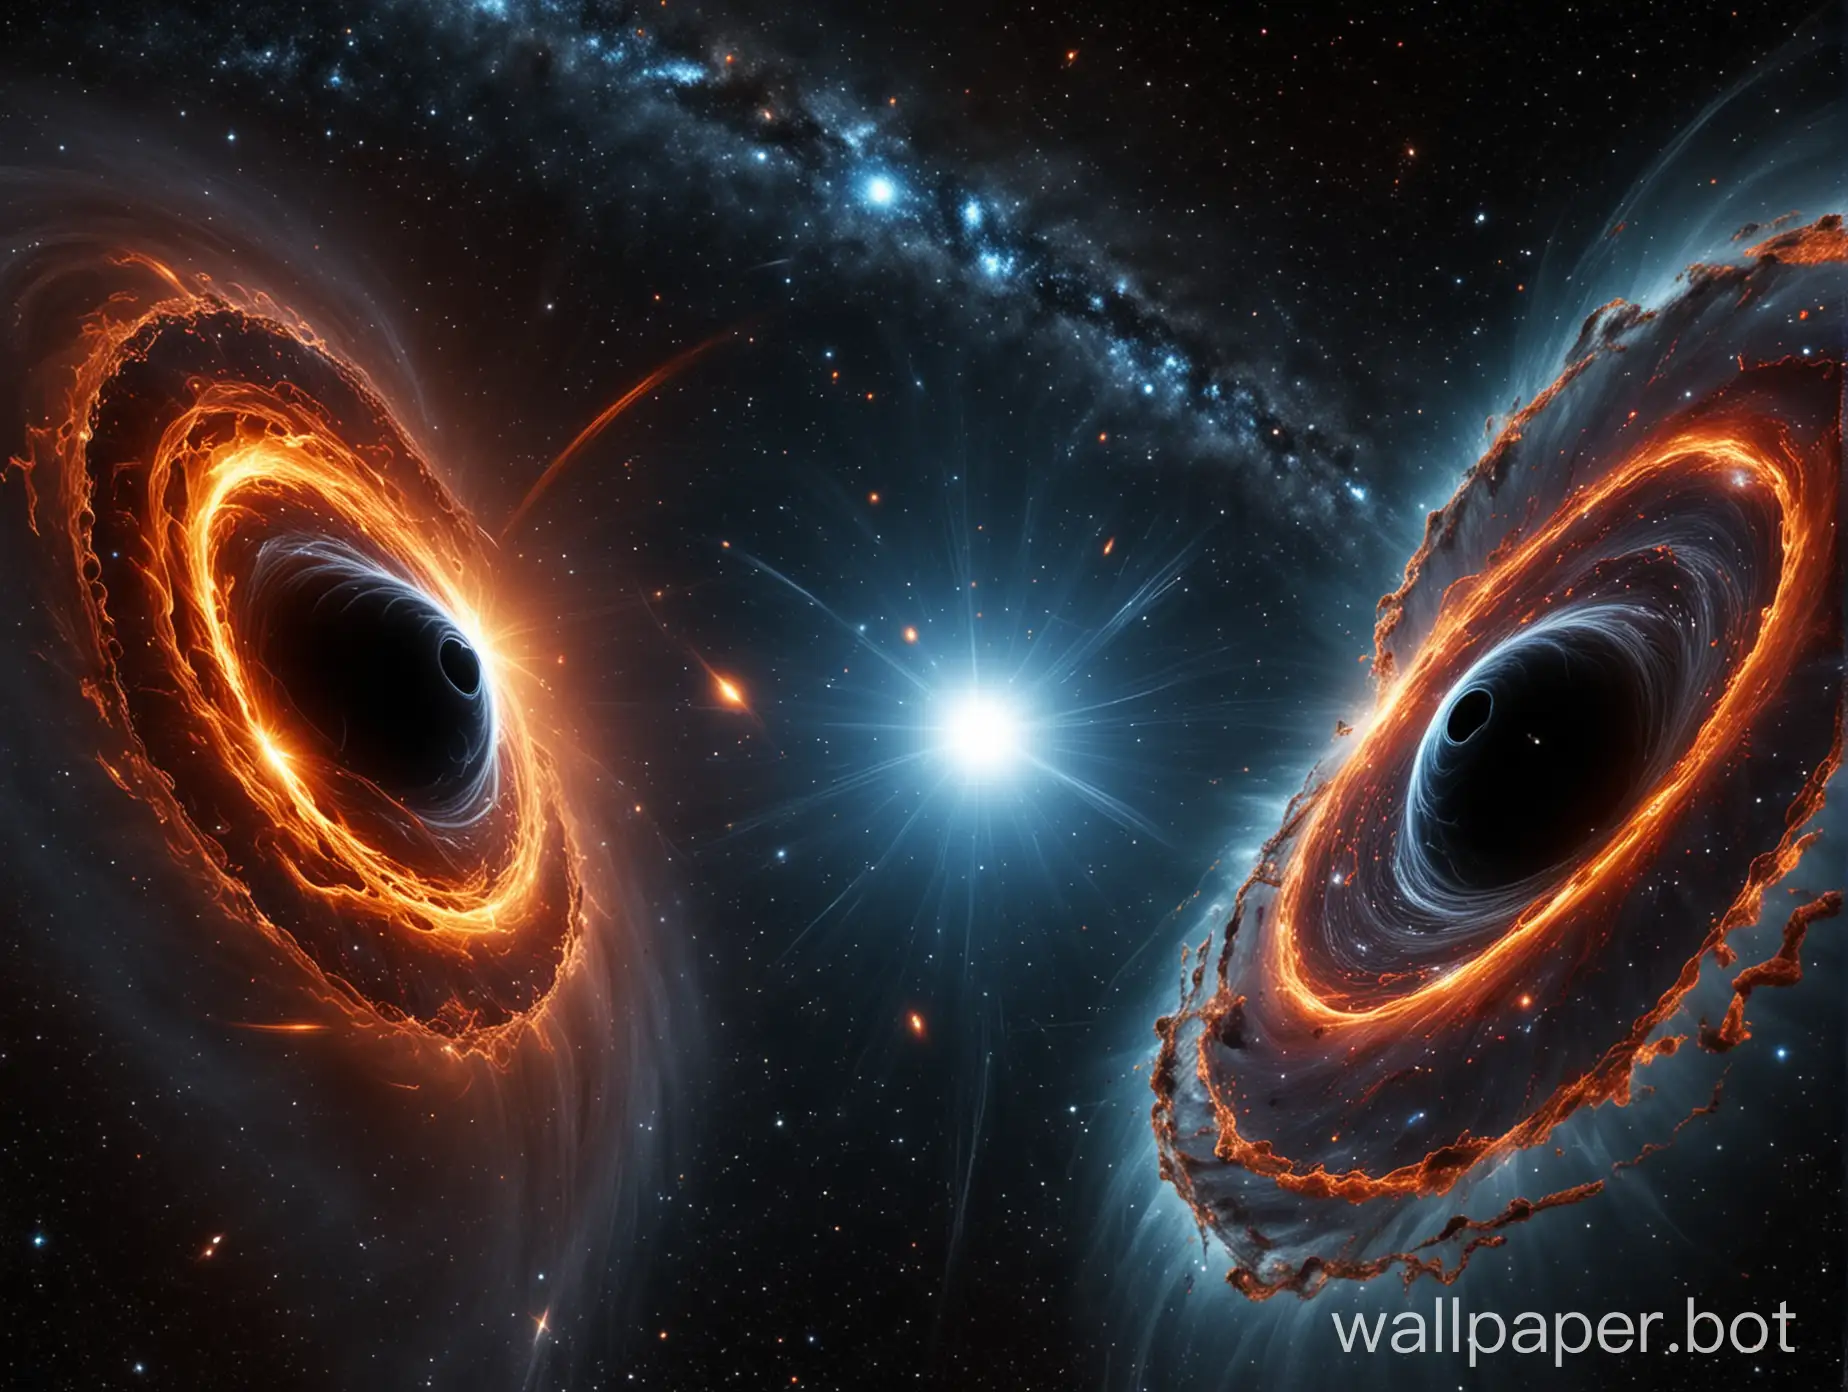 wallpapers for collision of black holes in cosmos